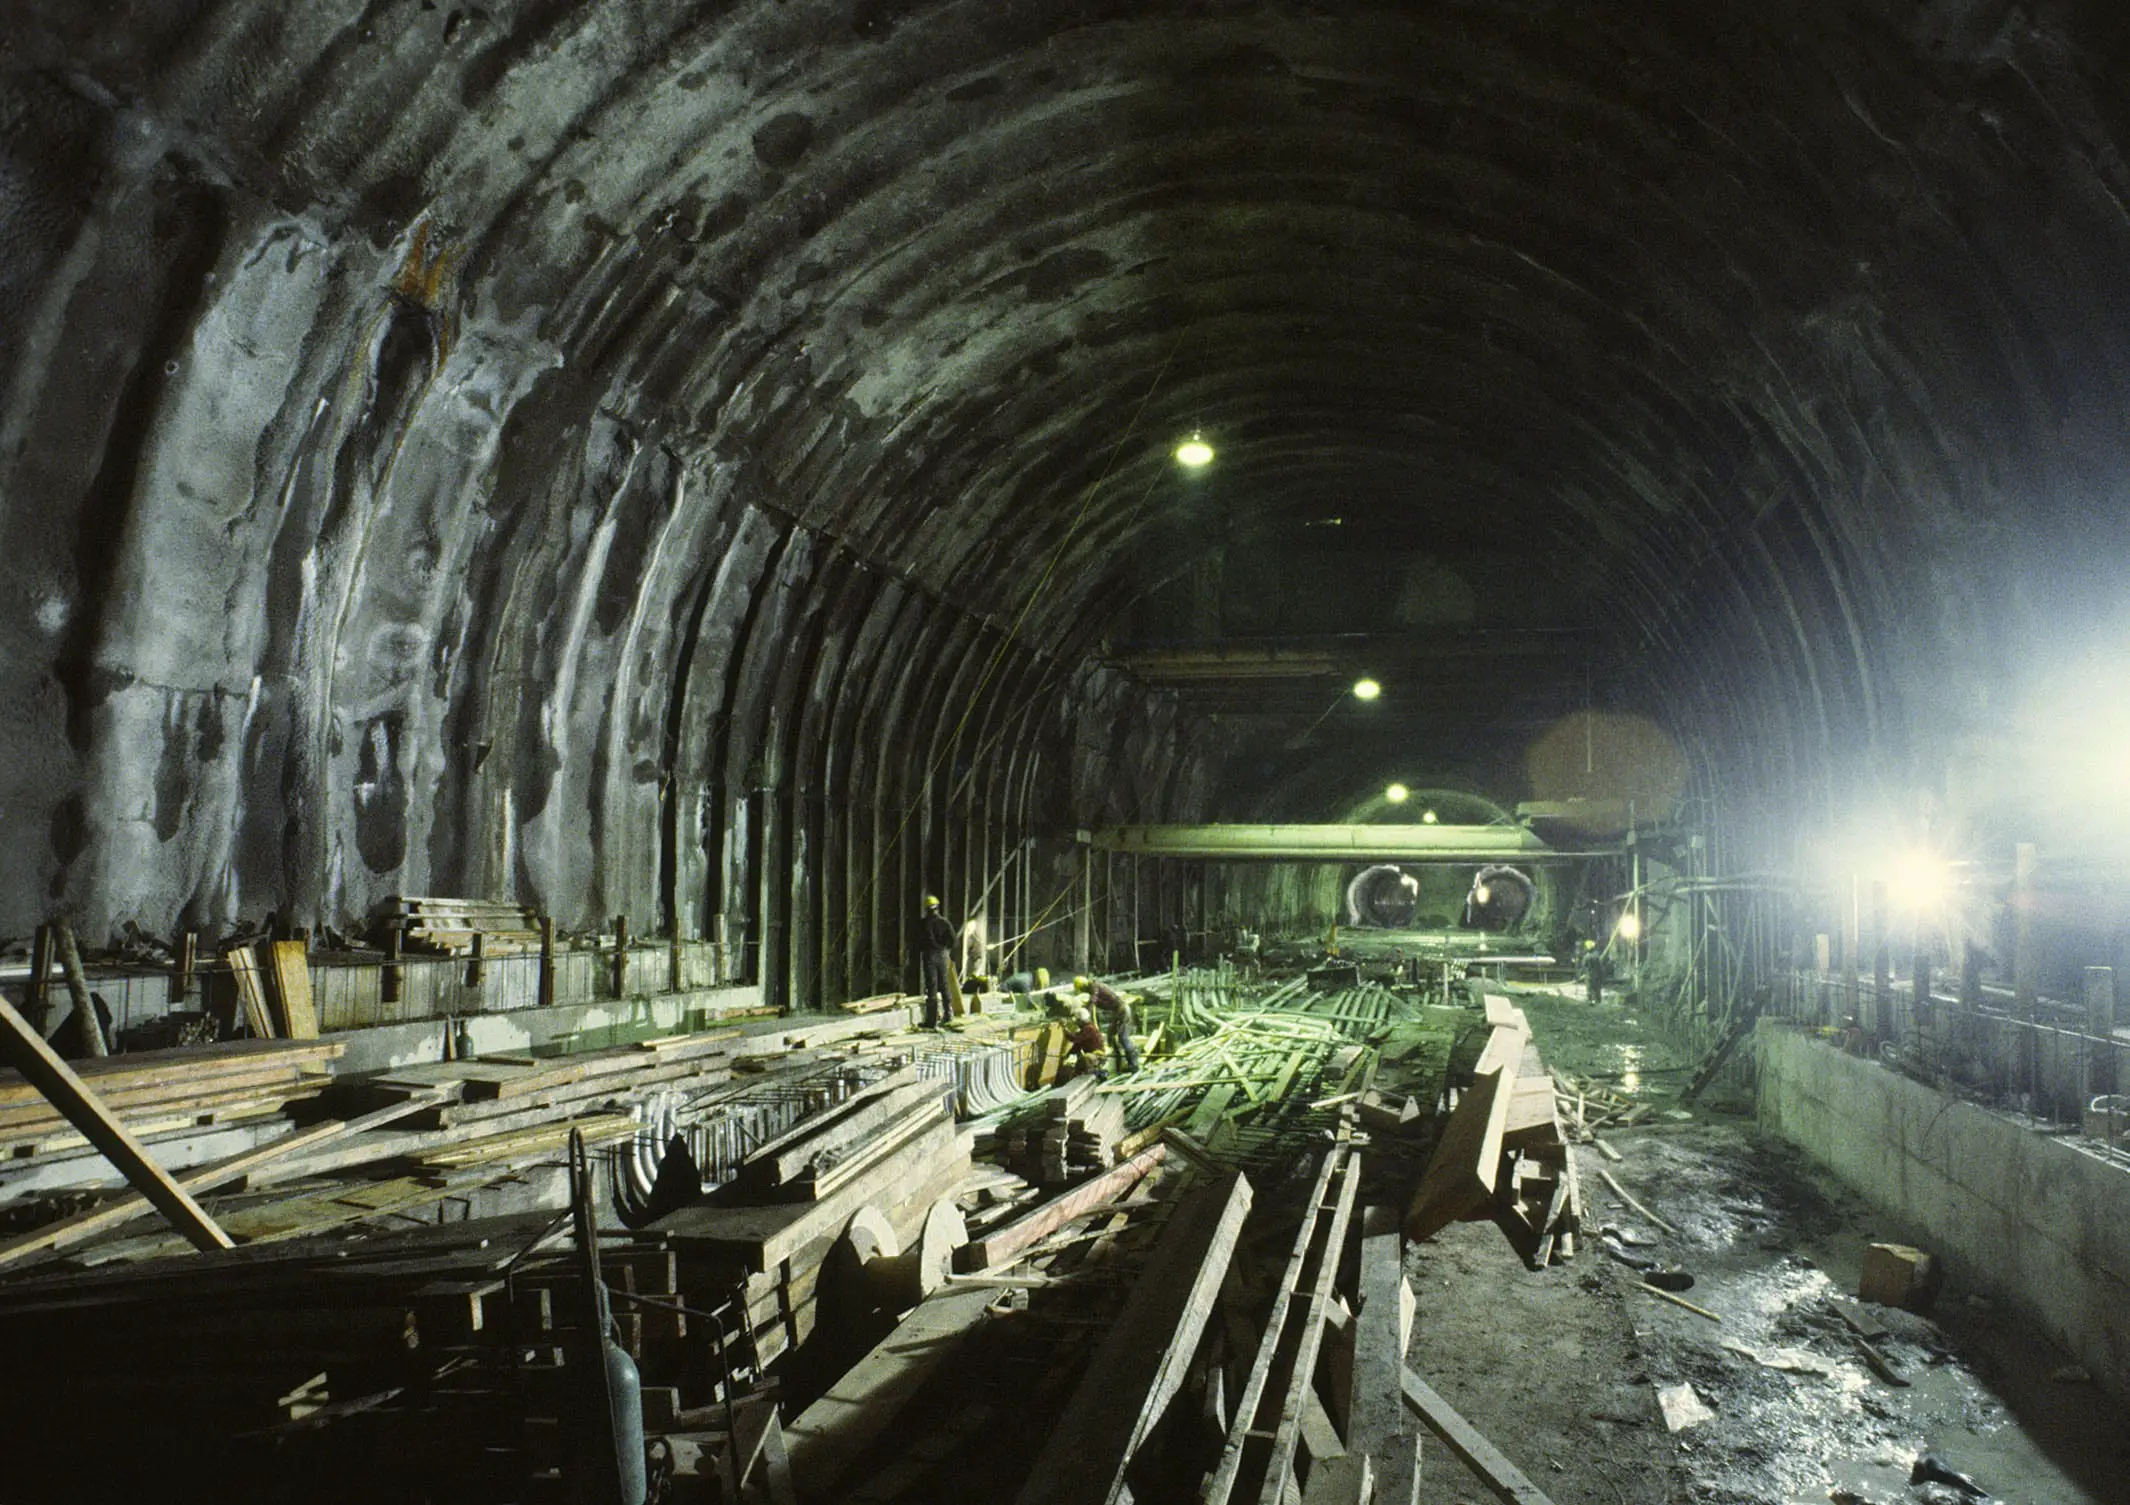 Construction continues at the Friendship Heights Metro station before its opening on August 25, 1984. (WMATA/Phil Portlock)